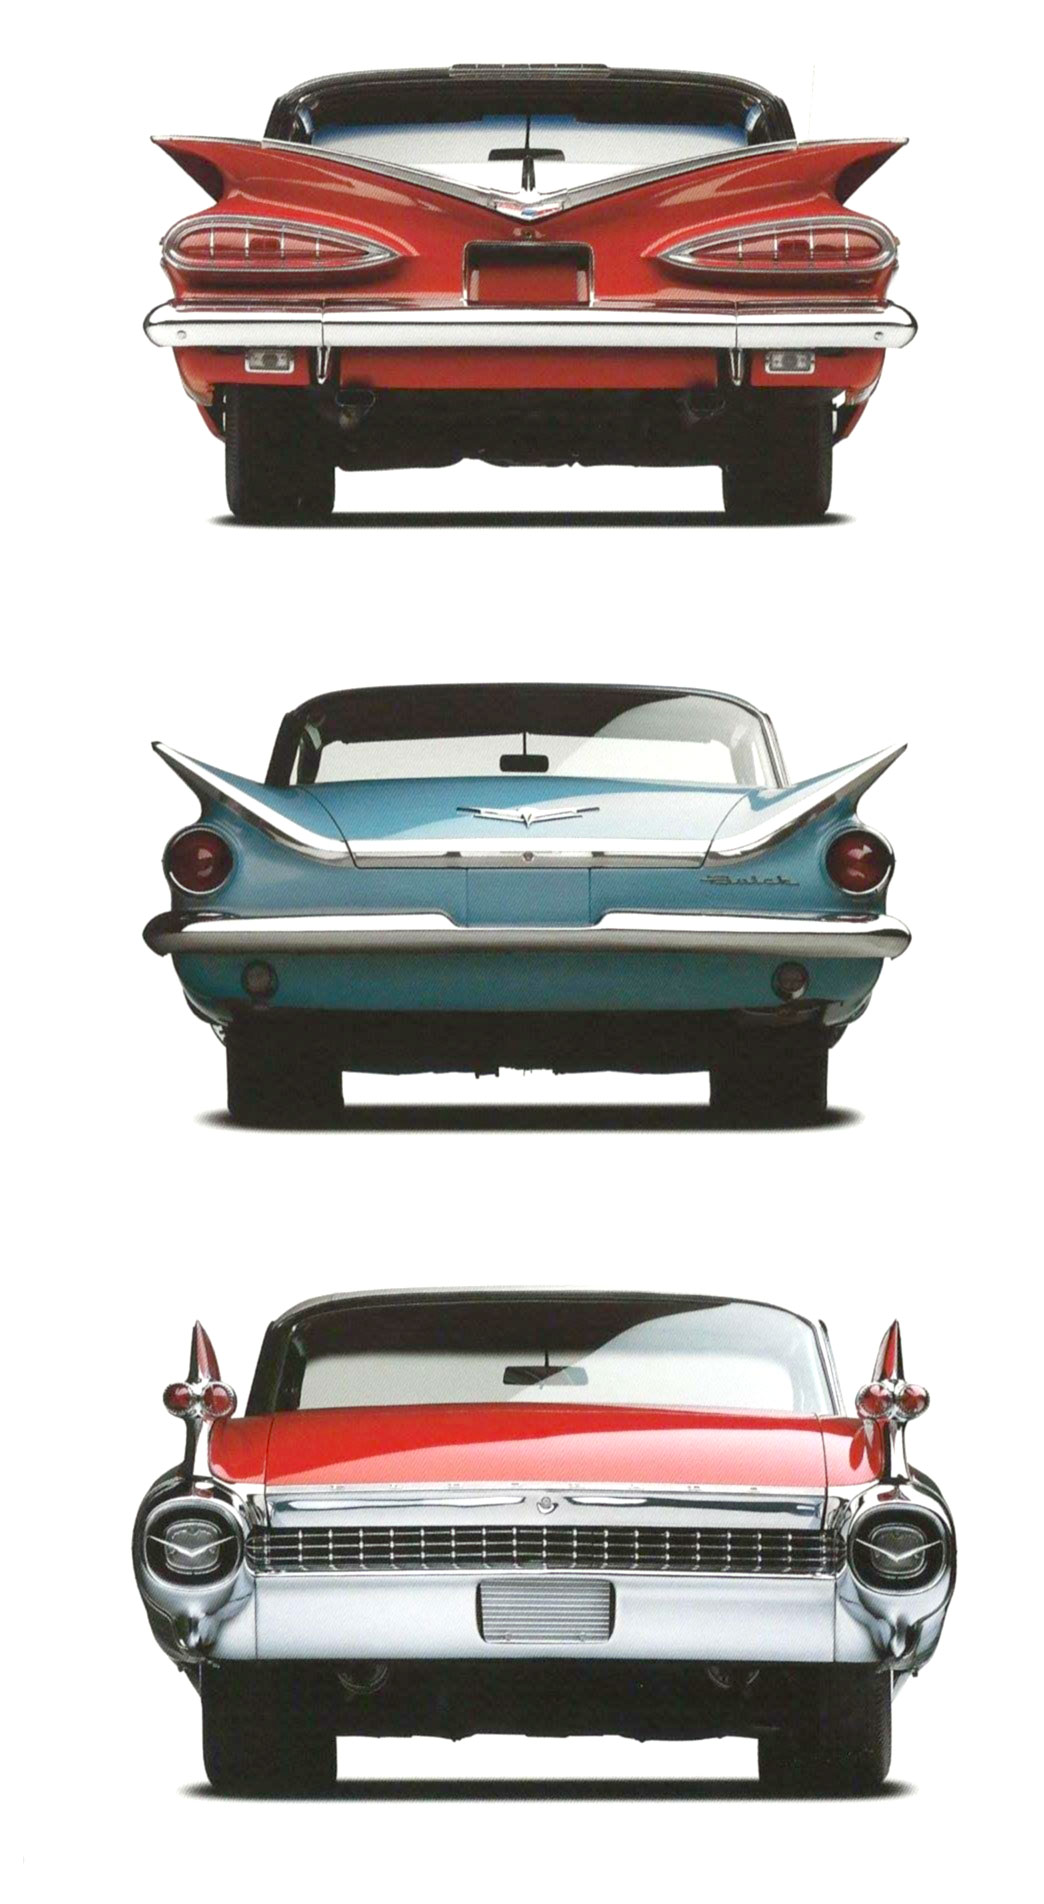 Rear profile photo showing and/or comparing the fins of 1959 Cheverolet, 1959 Cadillac and 1959 Buick cars.